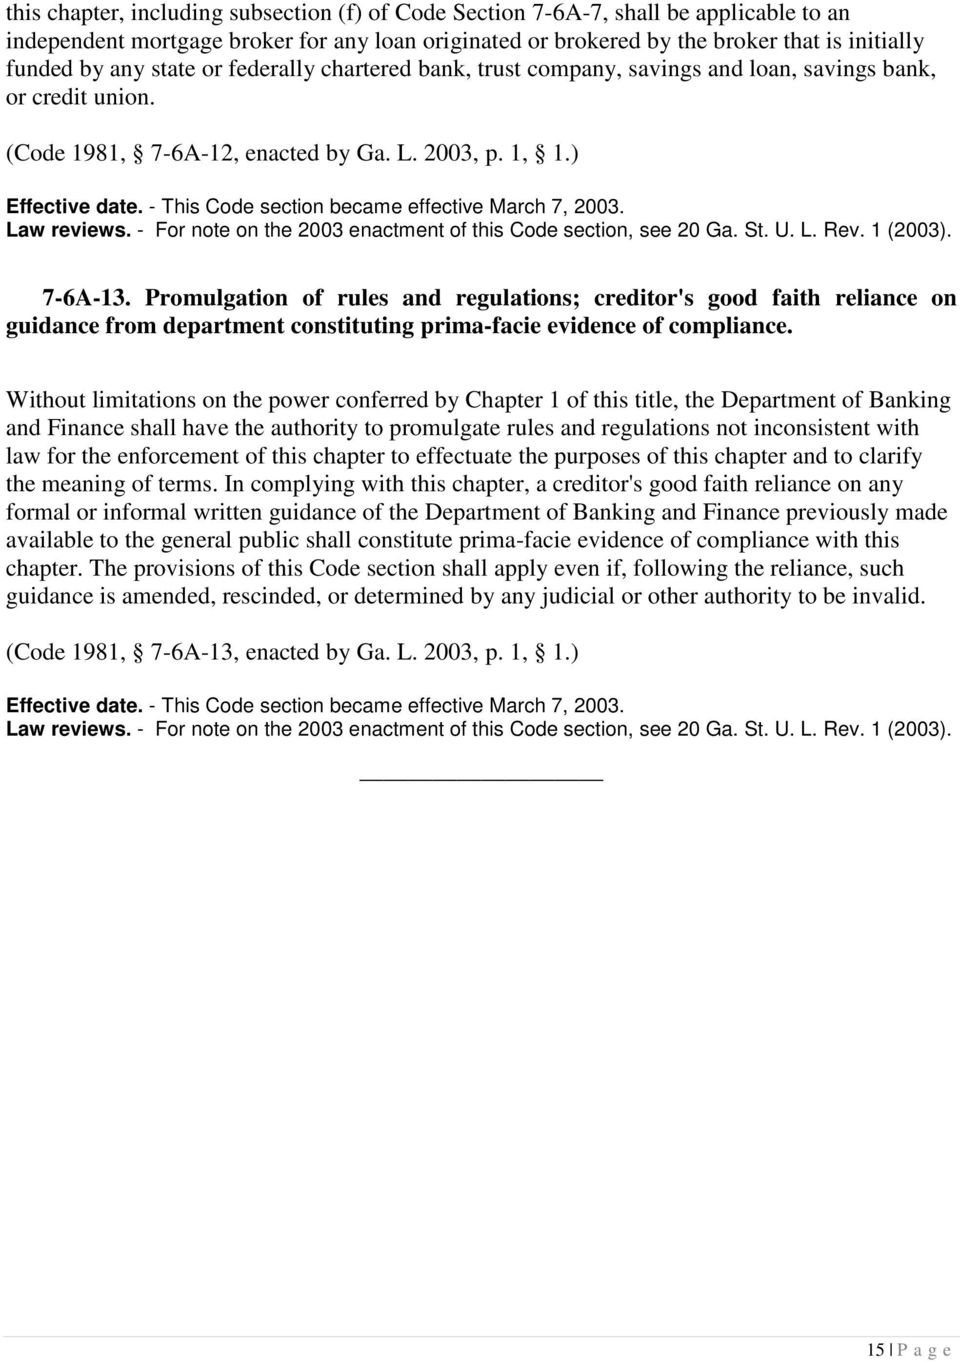 - This Code section became effective March 7, 2003. Law reviews. - For note on the 2003 enactment of this Code section, see 20 Ga. St. U. L. Rev. 1 (2003). 7-6A-13.